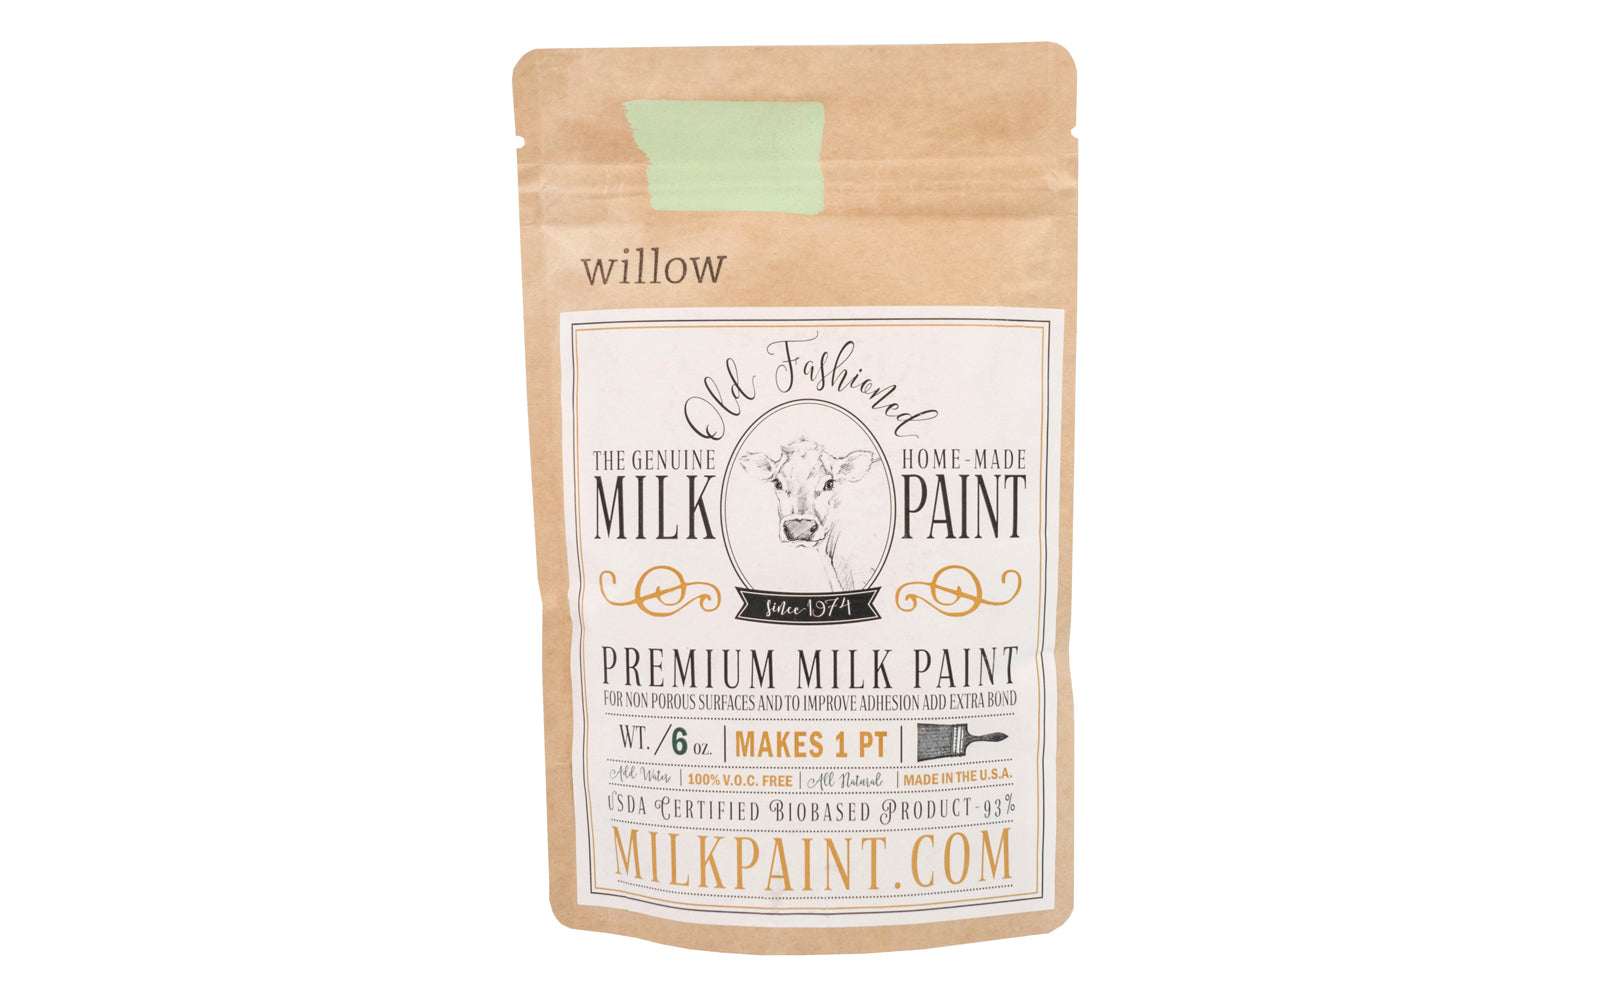 This Milk Paint color is "Willow" color - Light summer green. Comes in a powder form, you can control how thick/thin you mix the paint. Use it as you would regular paint, thinner for a wash/stain or thicker to create texture. Environmentally safe, non-toxic & is food safe. 100% VOC free. Powder Paint